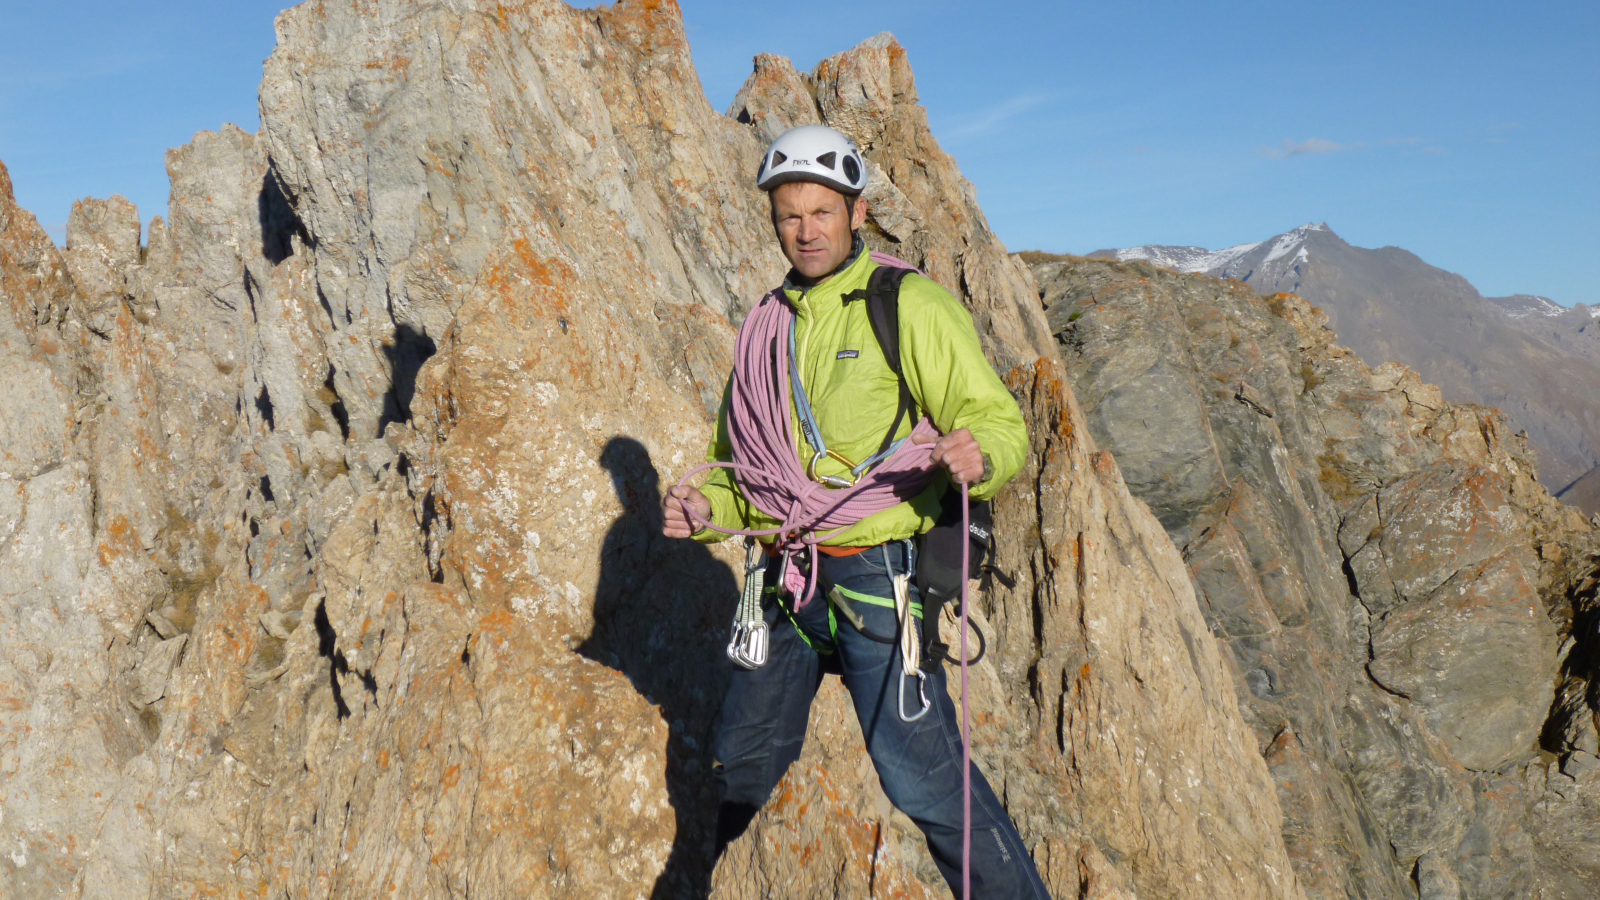 Summer mountaineering with Régis Burnel